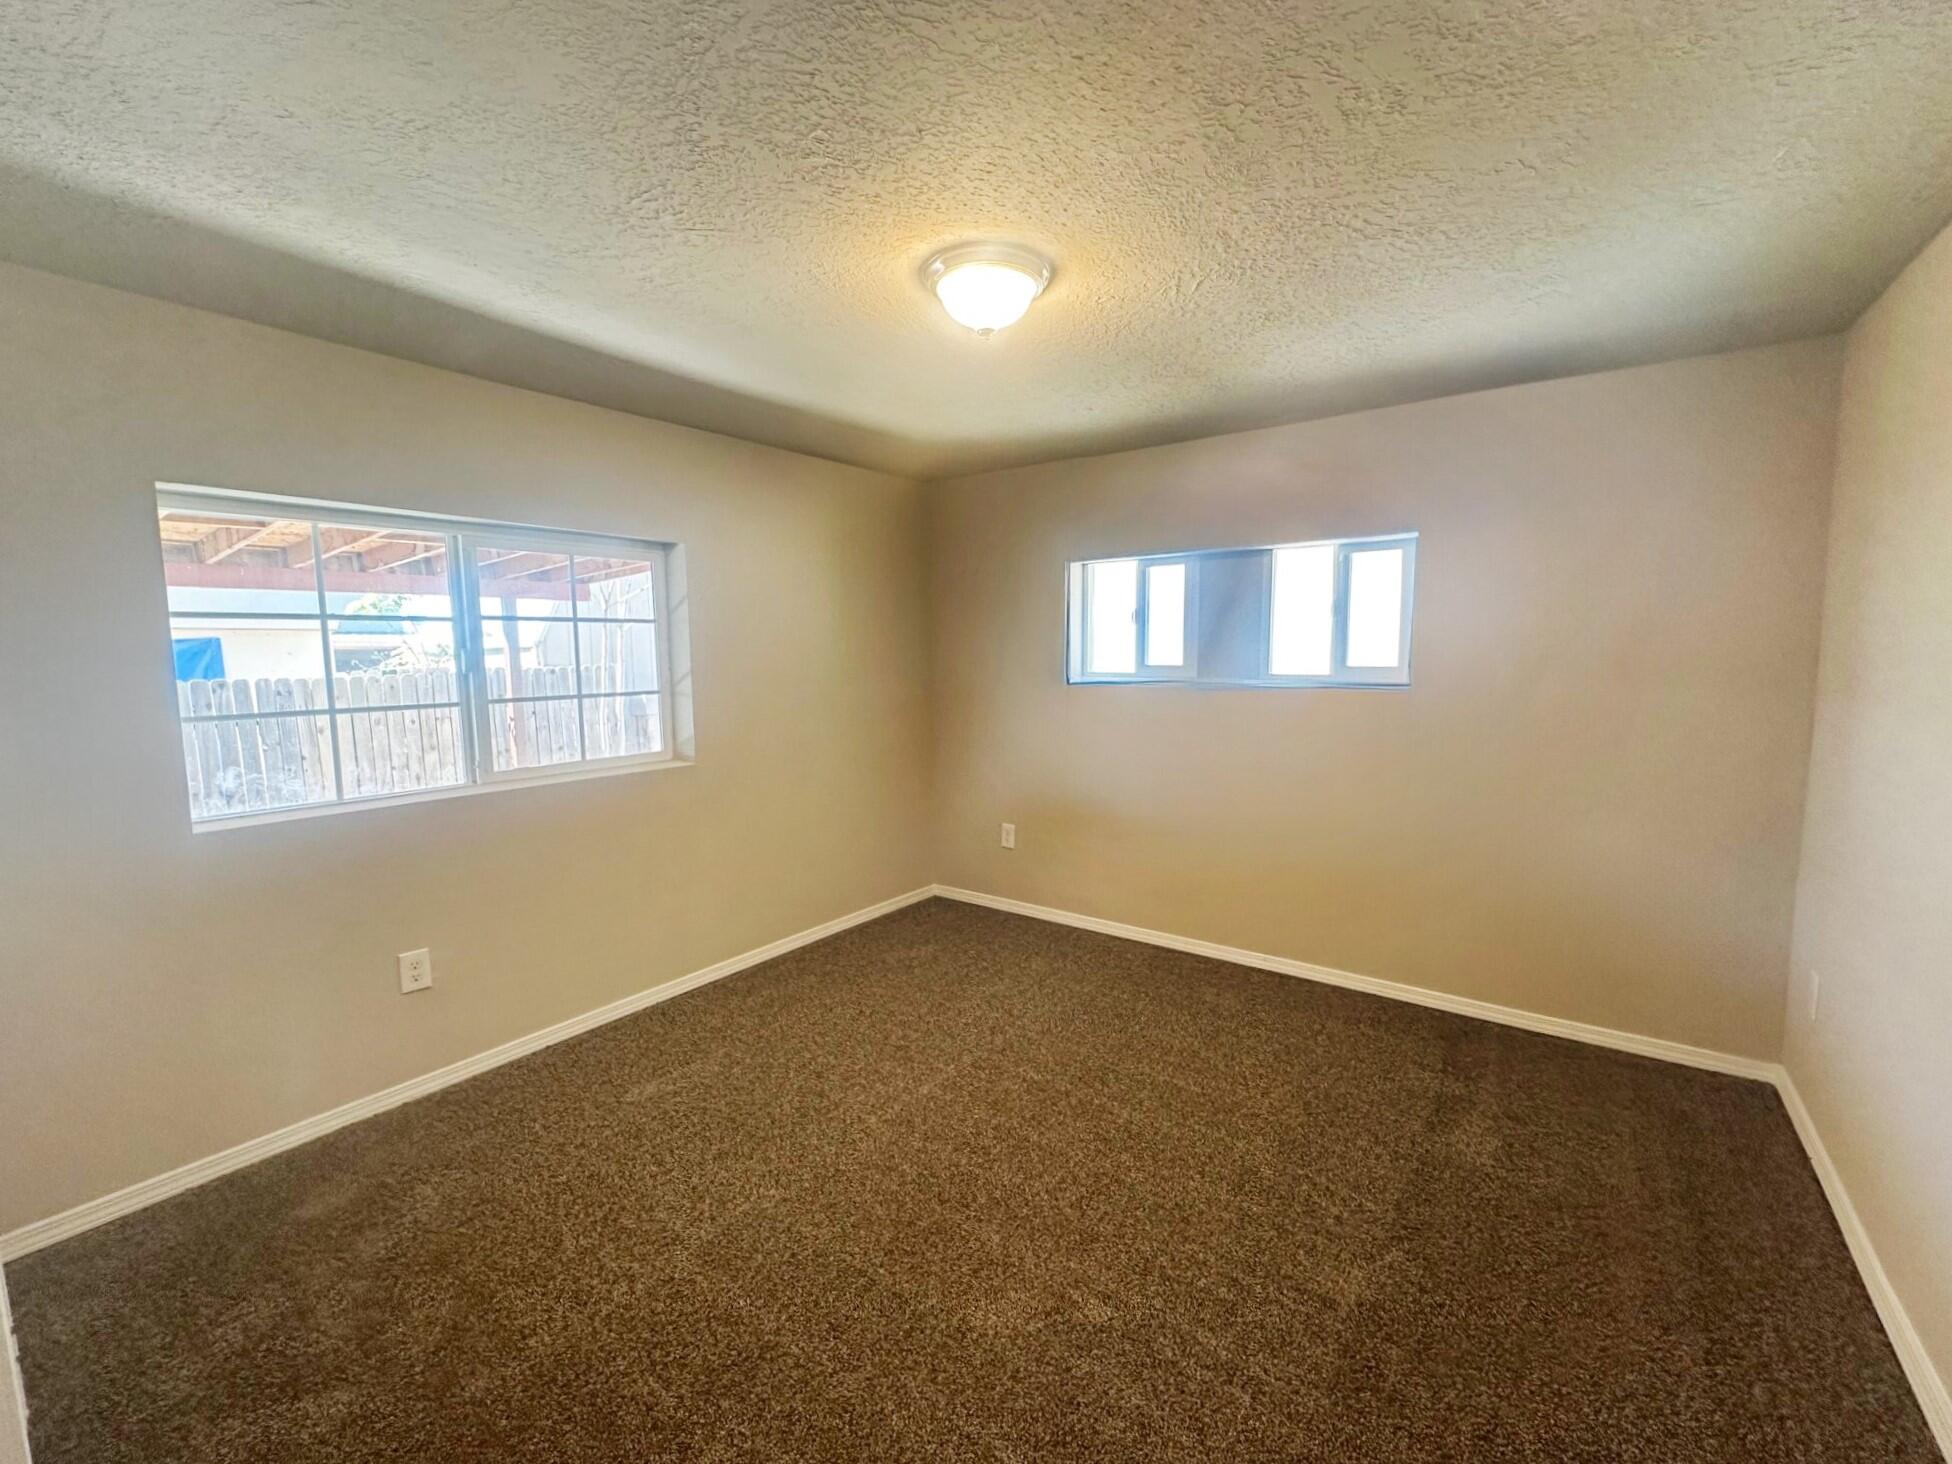 315 57th Street NW, Albuquerque, New Mexico 87105, 2 Bedrooms Bedrooms, ,1 BathroomBathrooms,Residential,For Sale,315 57th Street NW,1061261